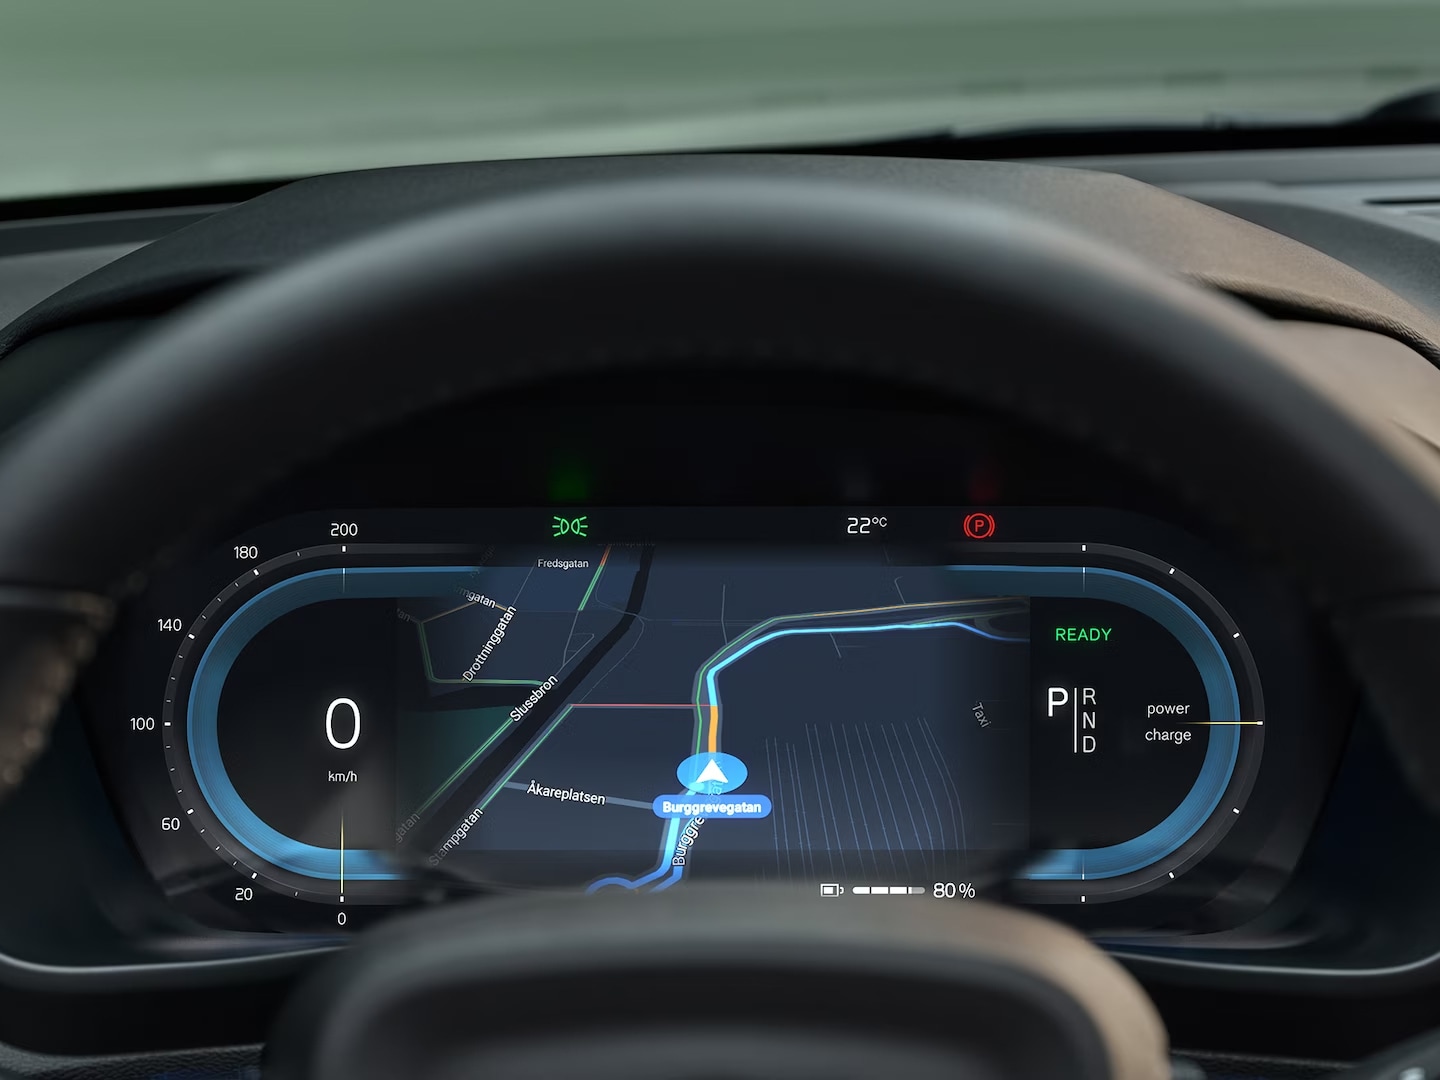 The Volvo EX40 driver display shows real-time navigation.